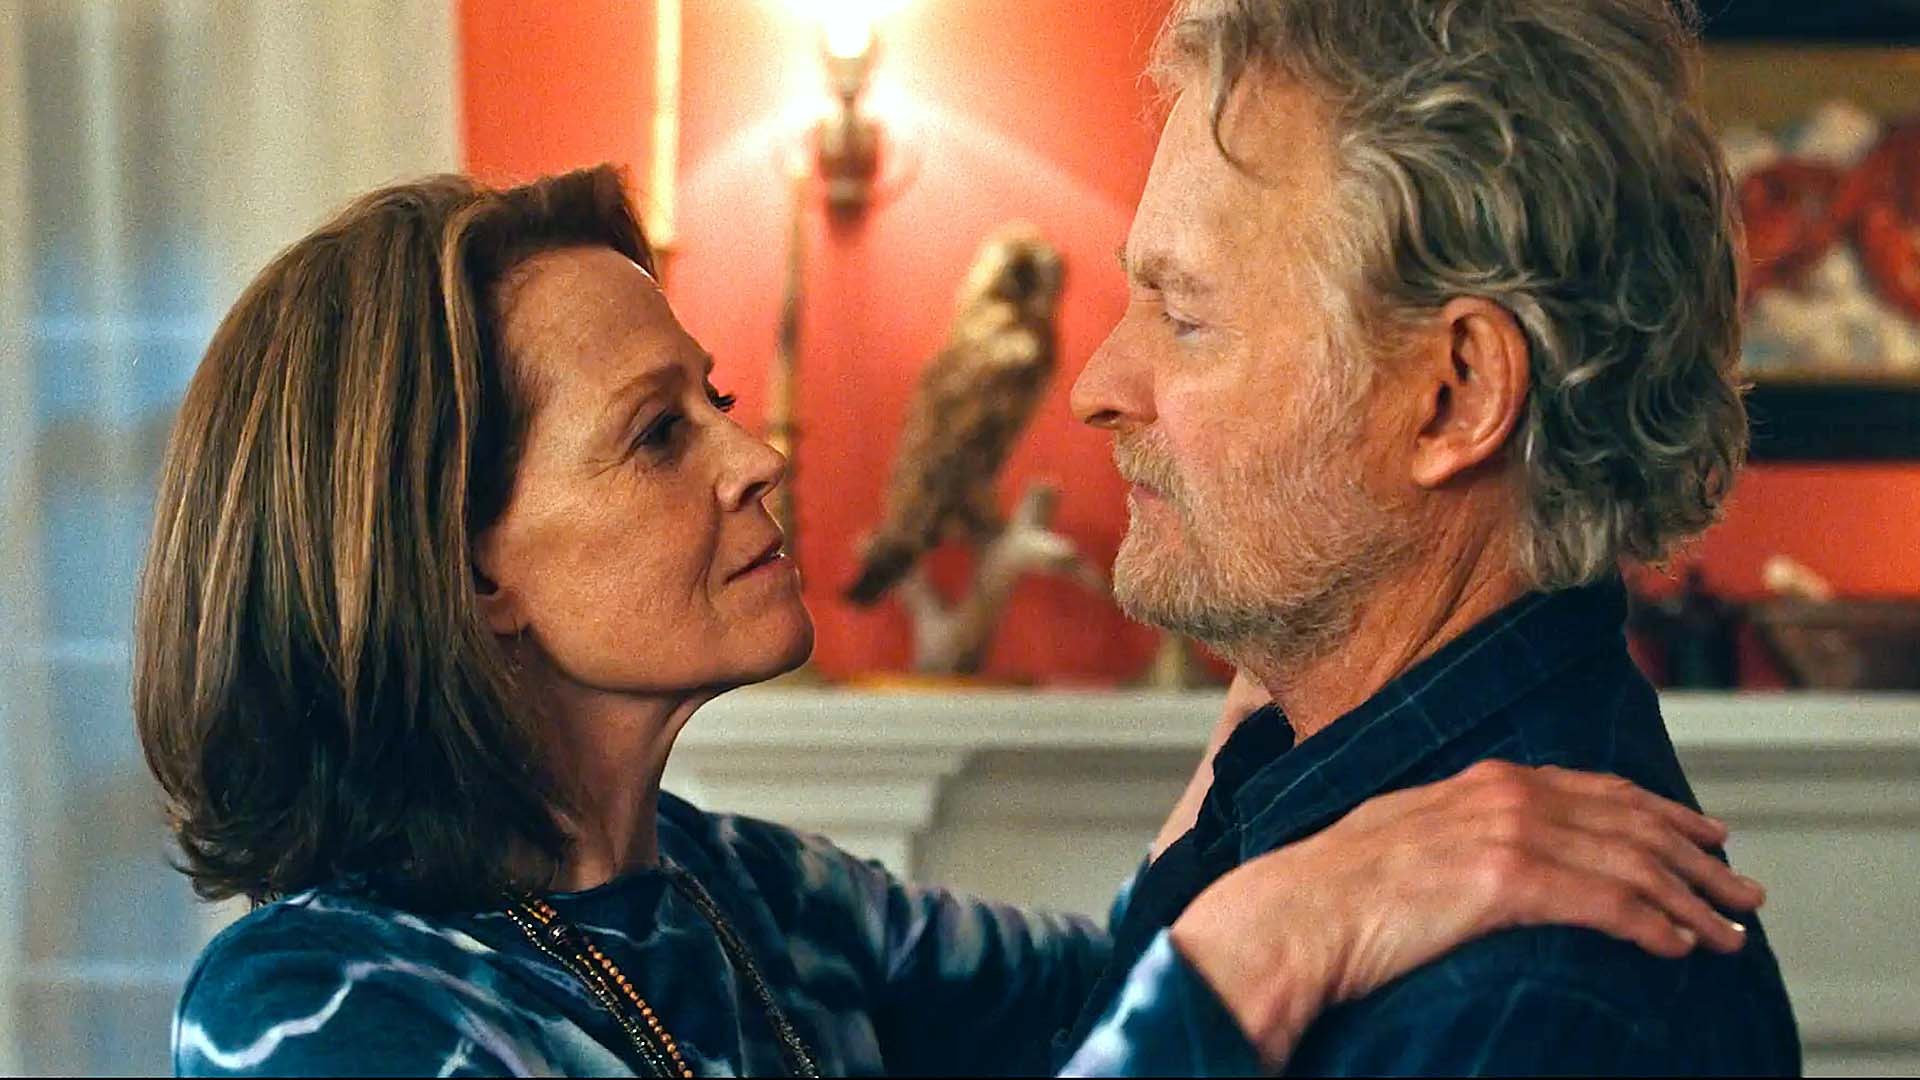 Sigourney Weaver, Star of "Good House" Said: It's Not Hard to Love Kevin Kline!